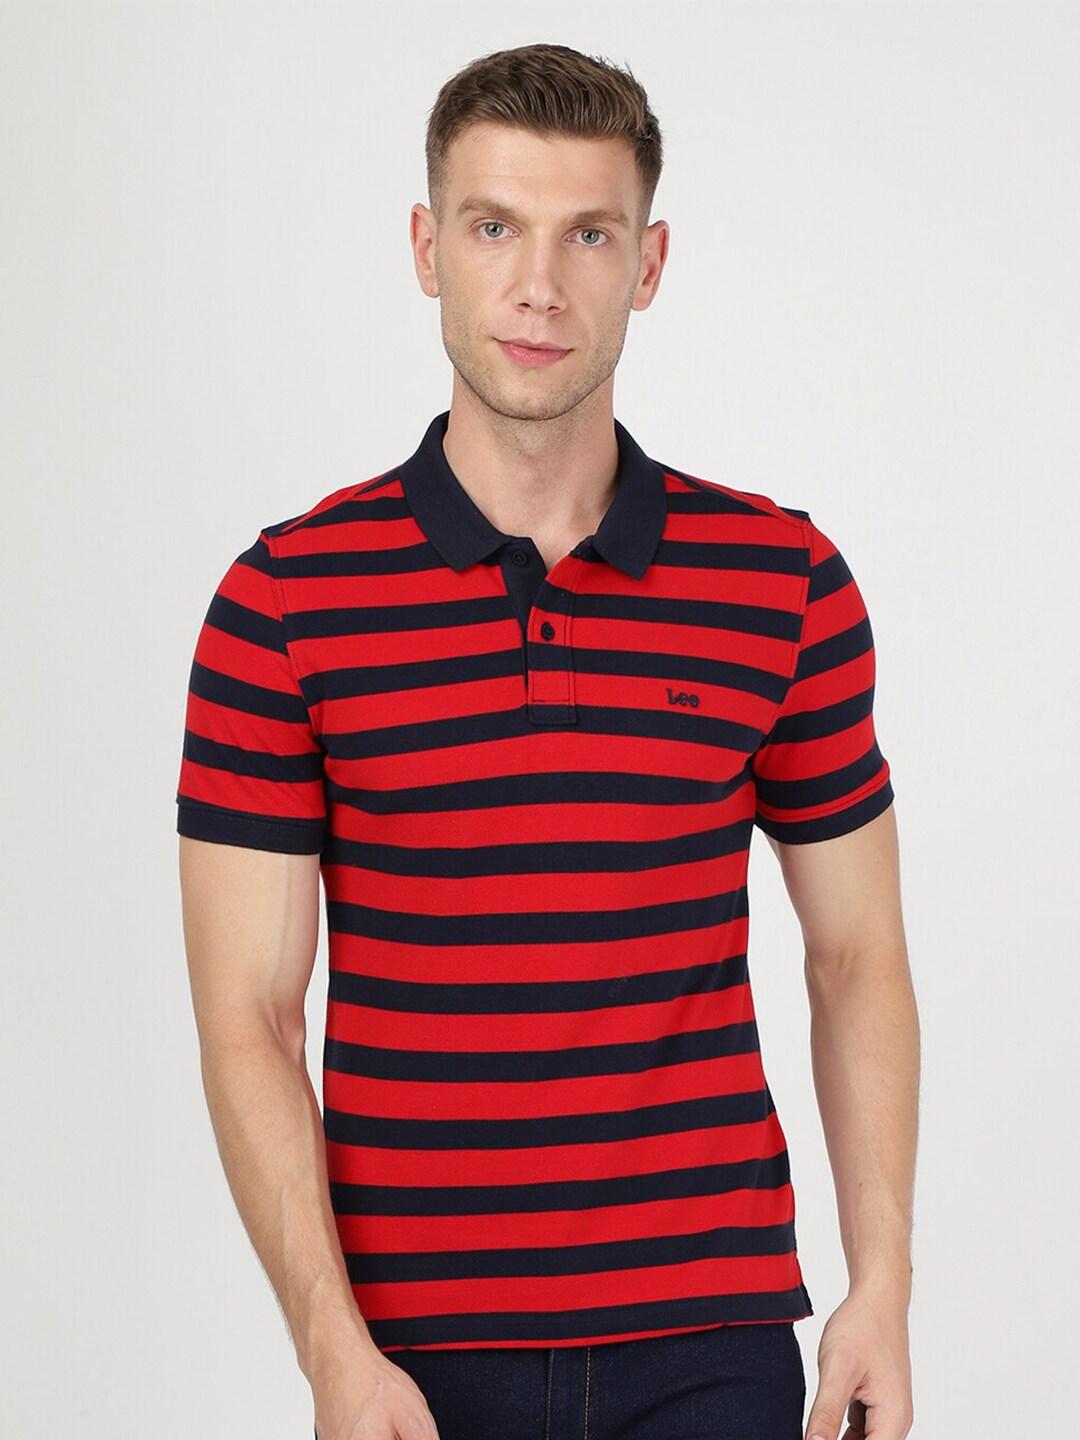 lee-men-blue-&-red-striped-polo-collar-slim-fit-t-shirt